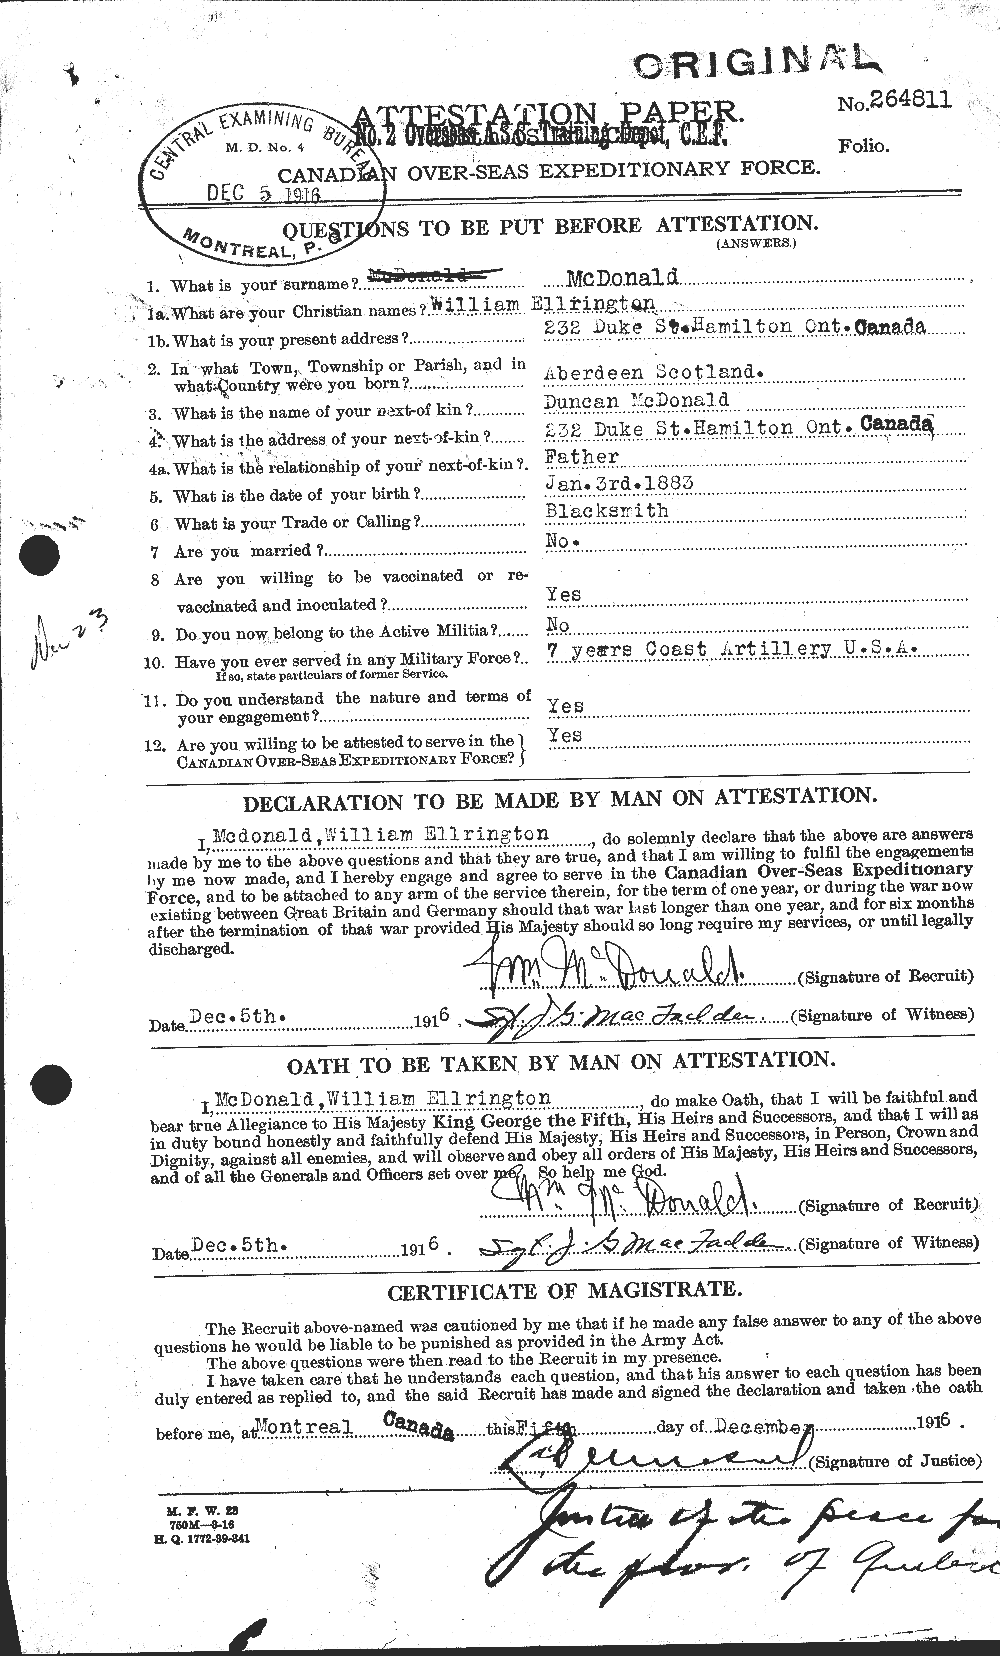 Personnel Records of the First World War - CEF 520117a